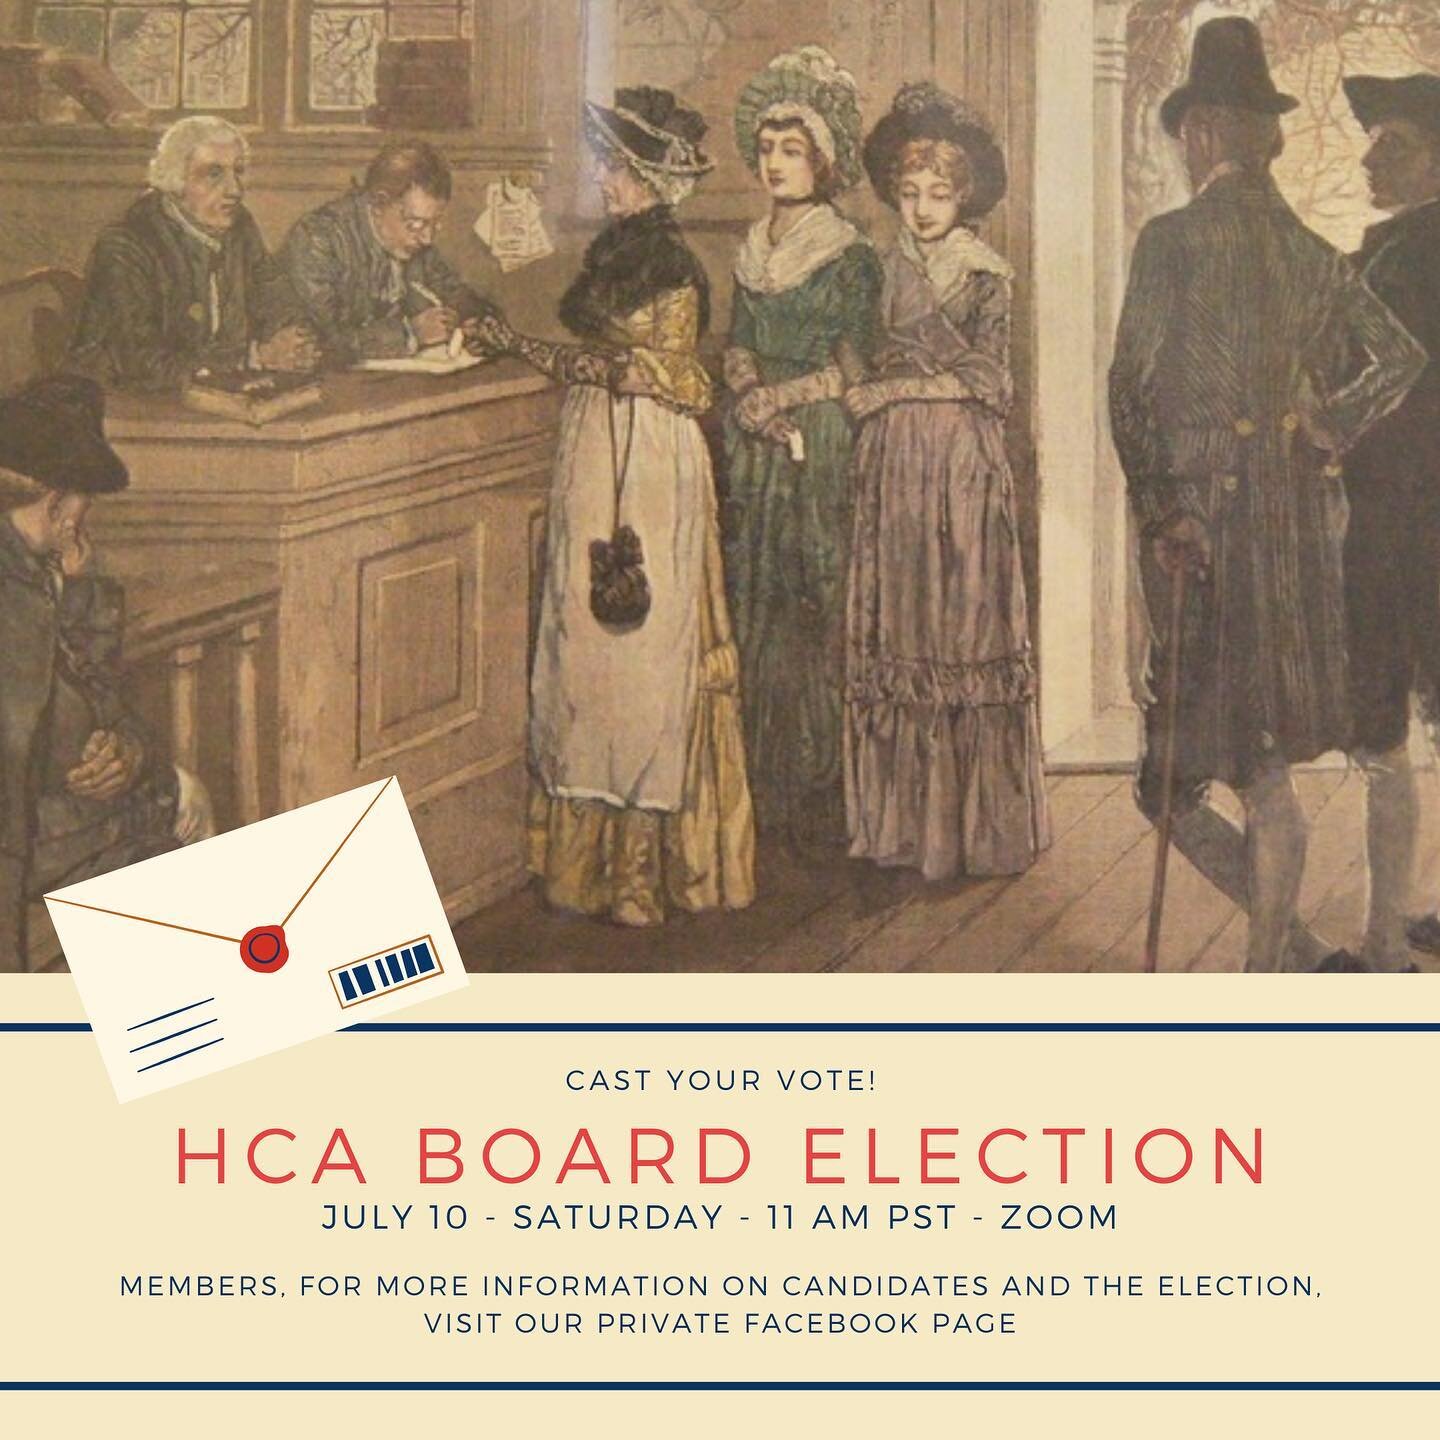 🗳 Hear ye, hear ye! 🗳 
The 2021-22 HCA board will be voted upon on July 10, 11am via Zoom.
.
If you are interested in running for any board position, please visit our private, members only Facebook group, find the election post, and list your name 